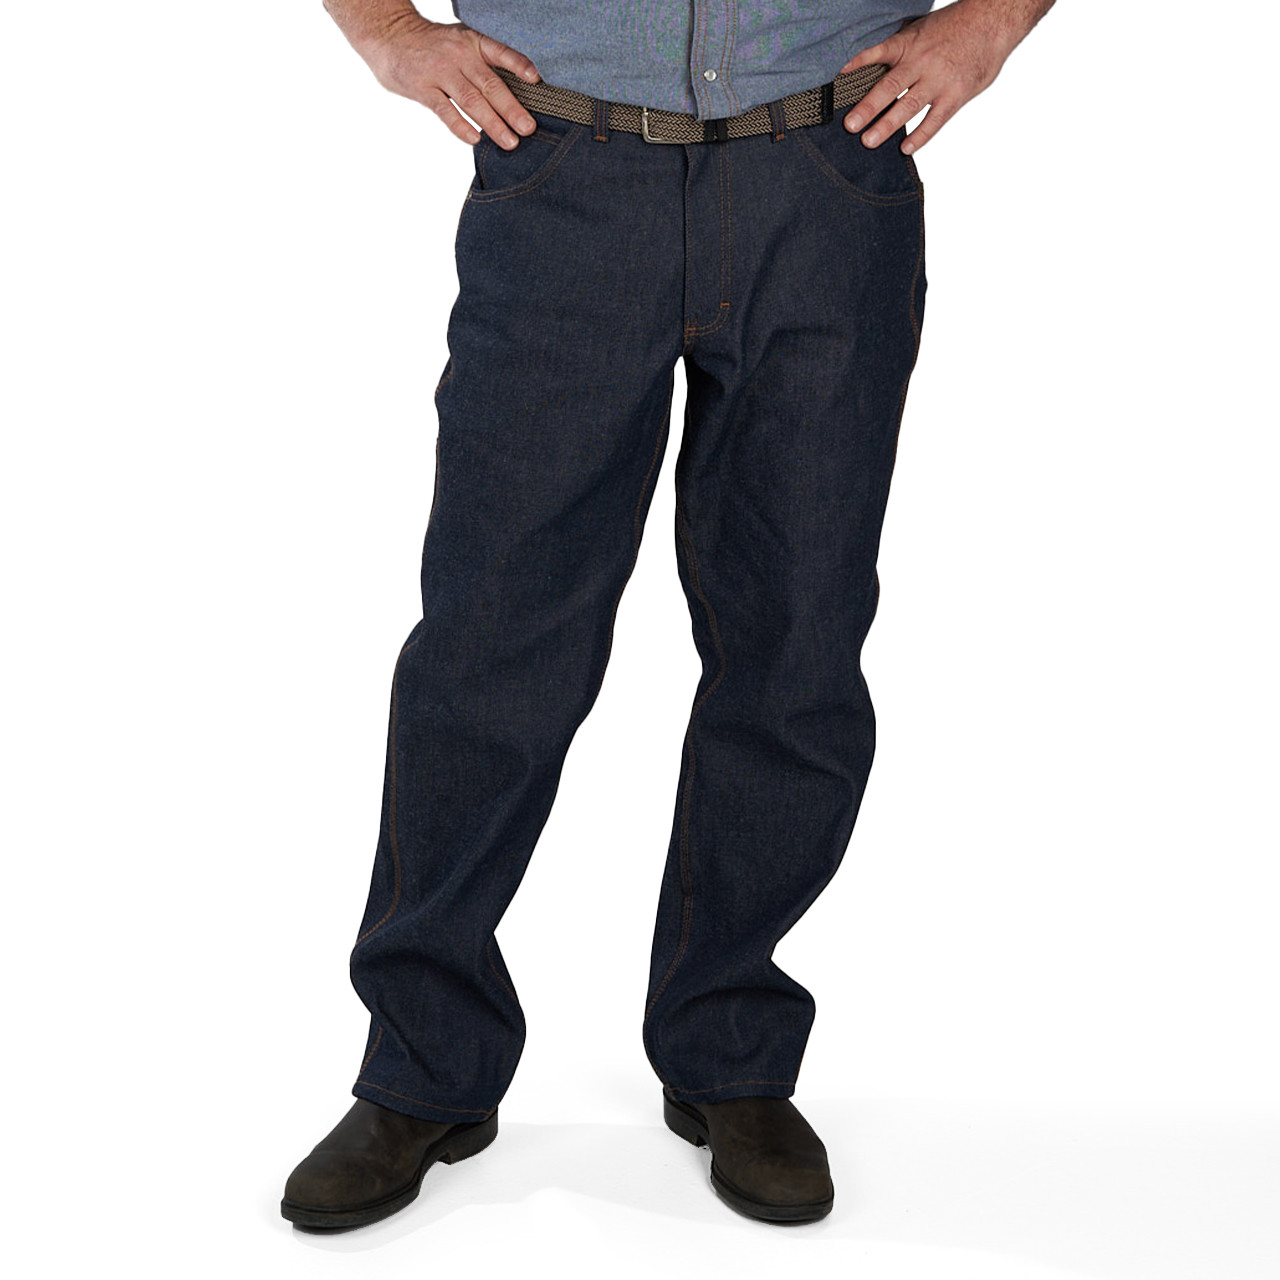 What are suspender buttons? Denim FAQ answered by Denimhunters